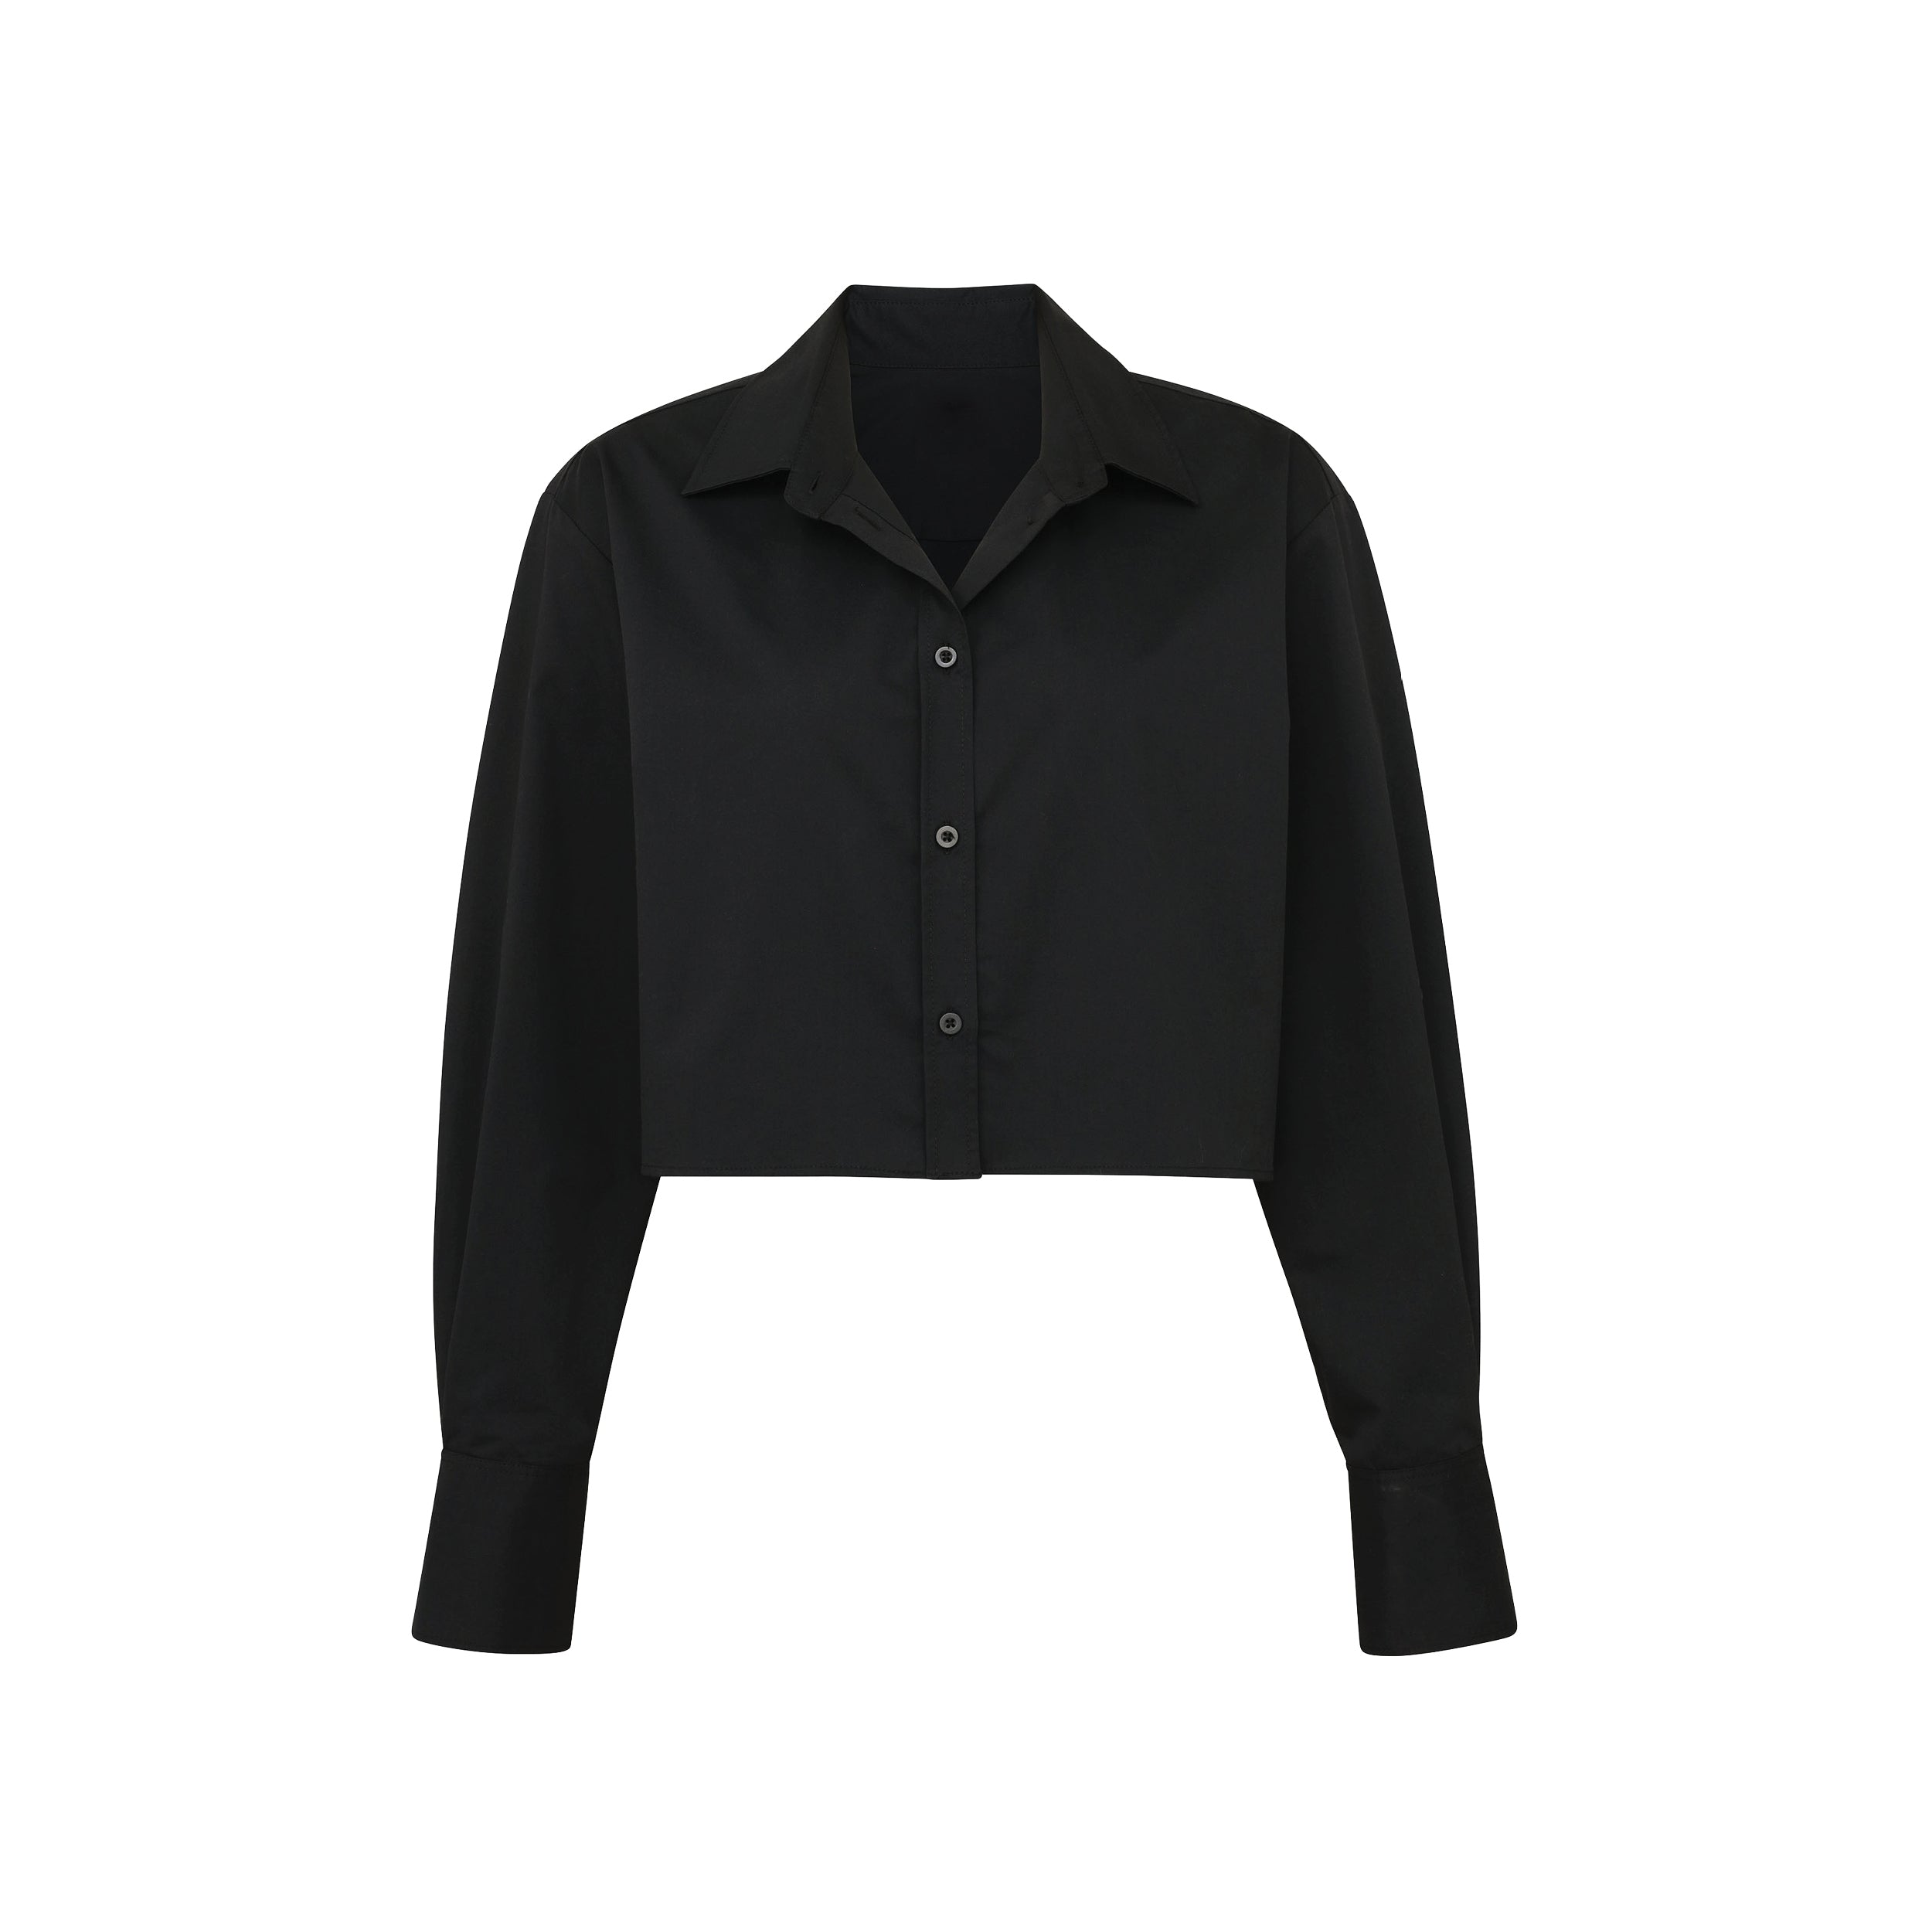 Front view Product shot of black cropped button up shirt